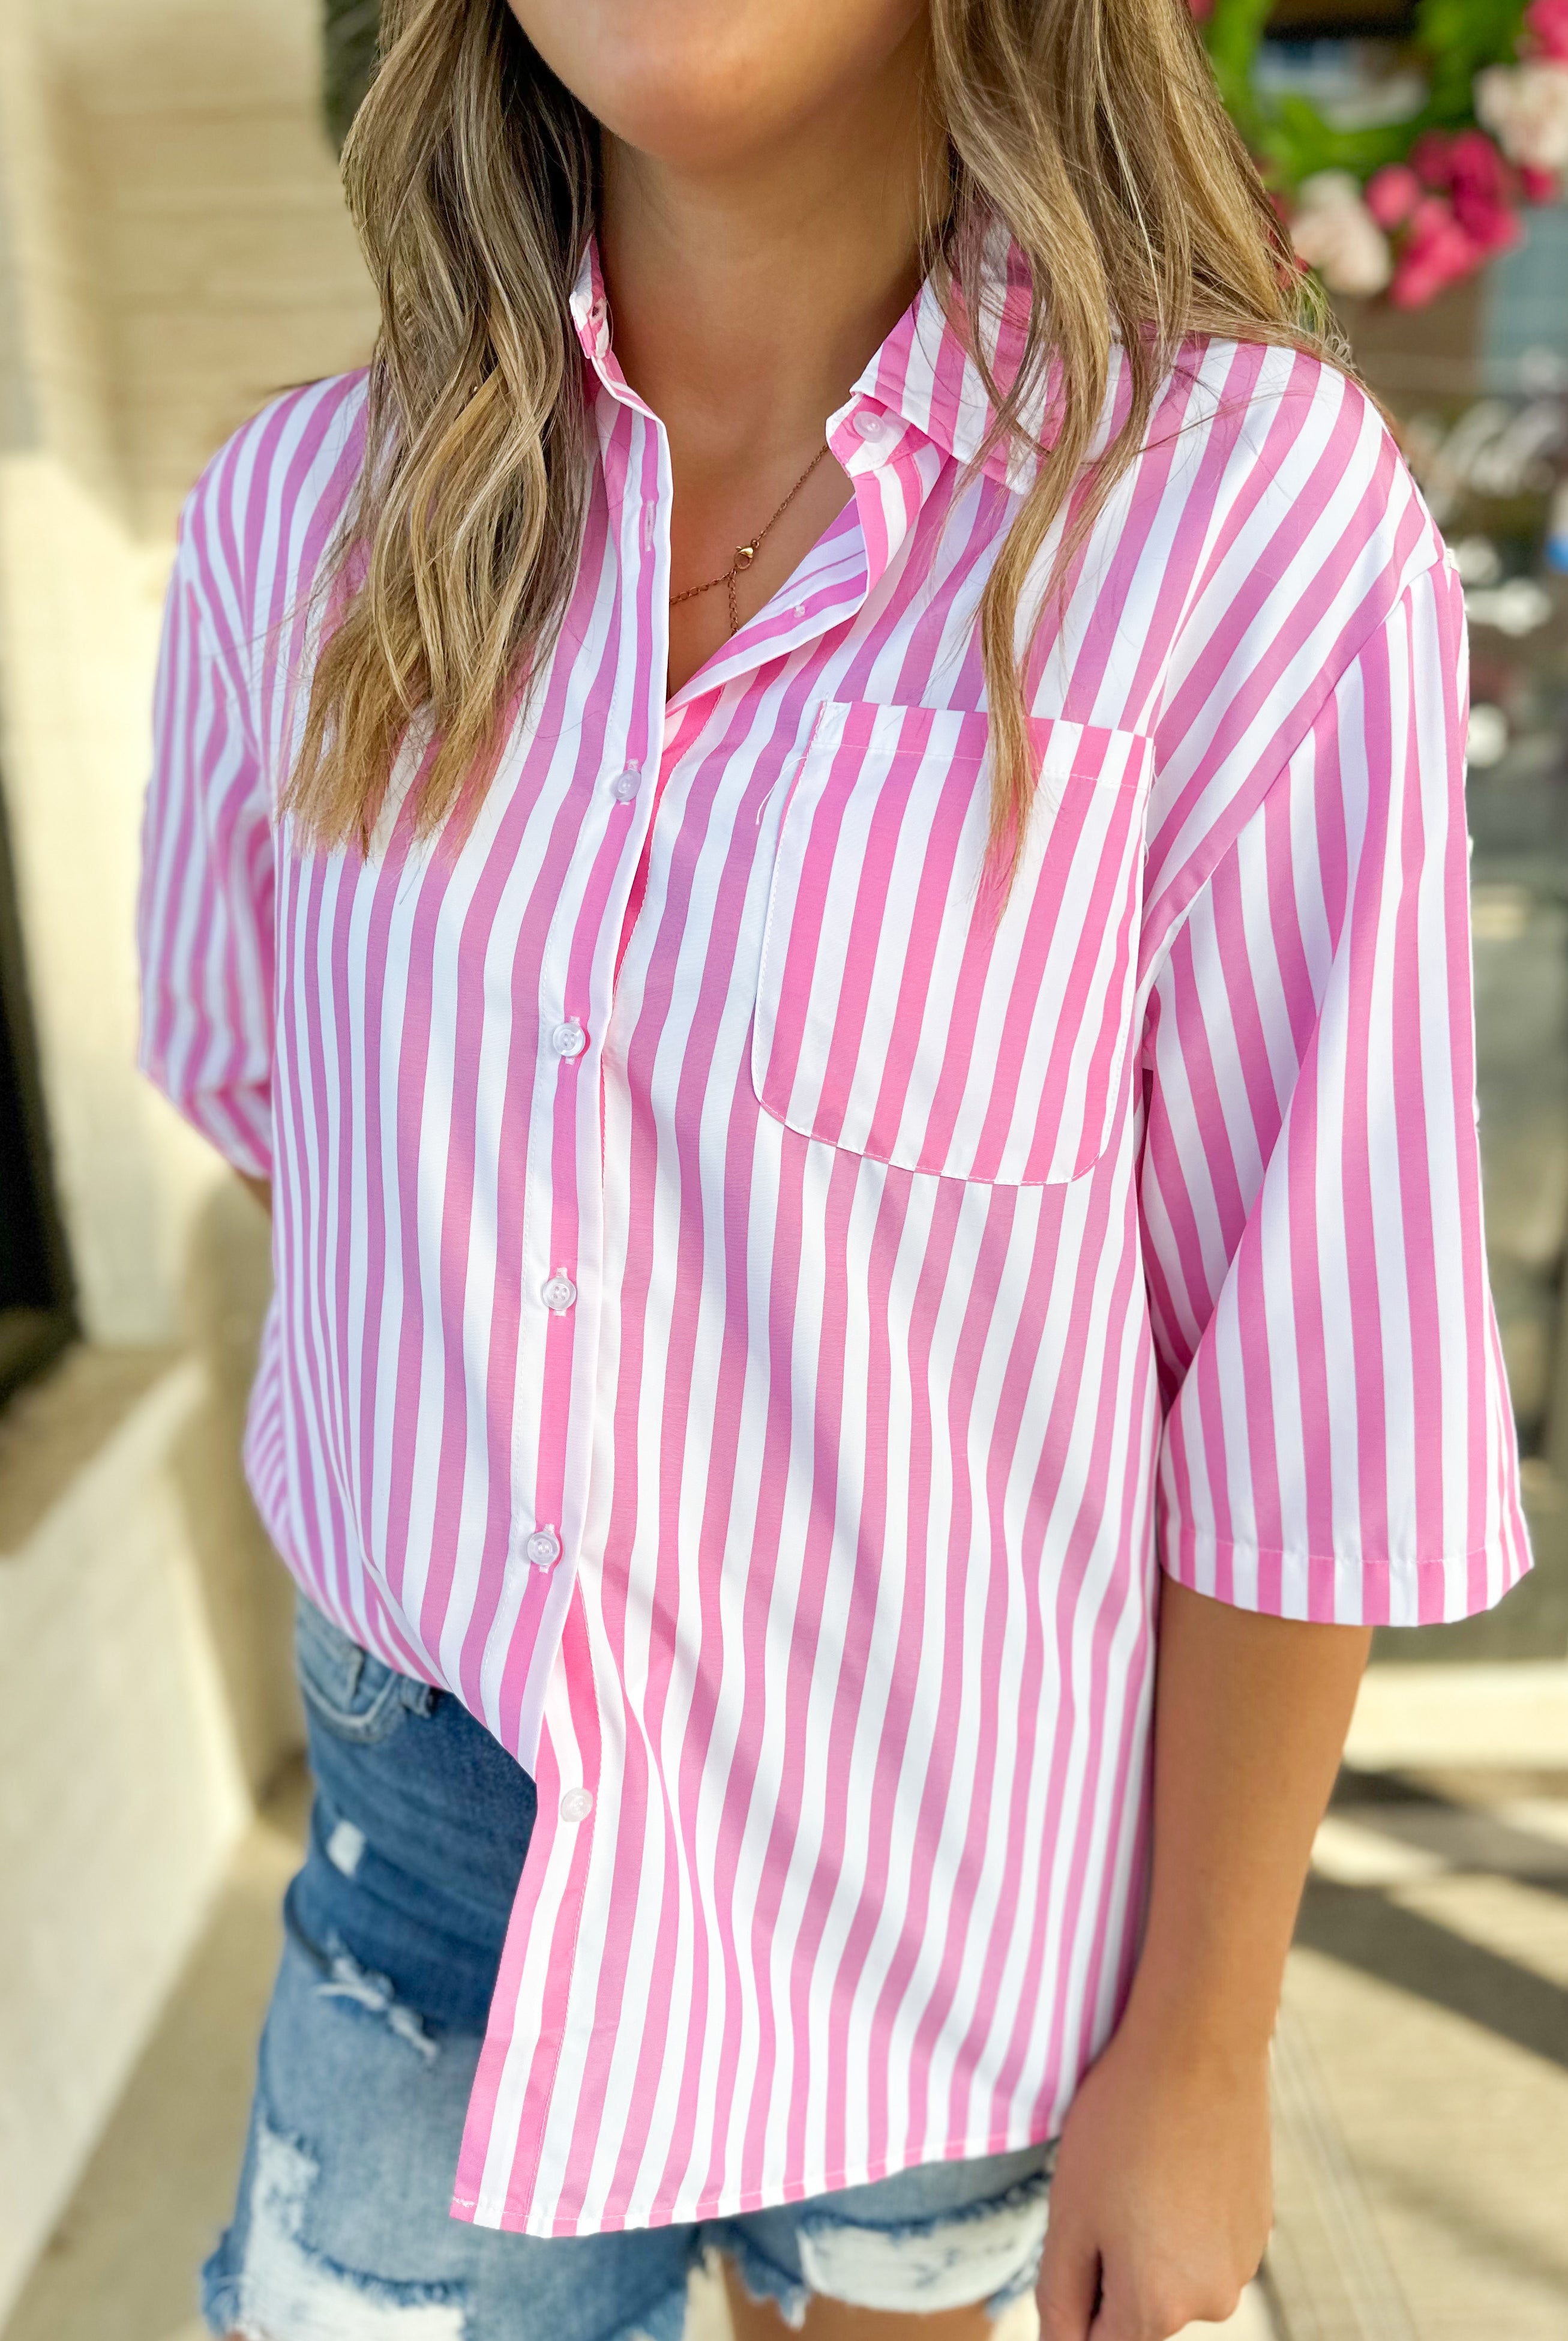 Malichi Striped Hi Lo Short Sleeve Collared Shirt - Be You Boutique